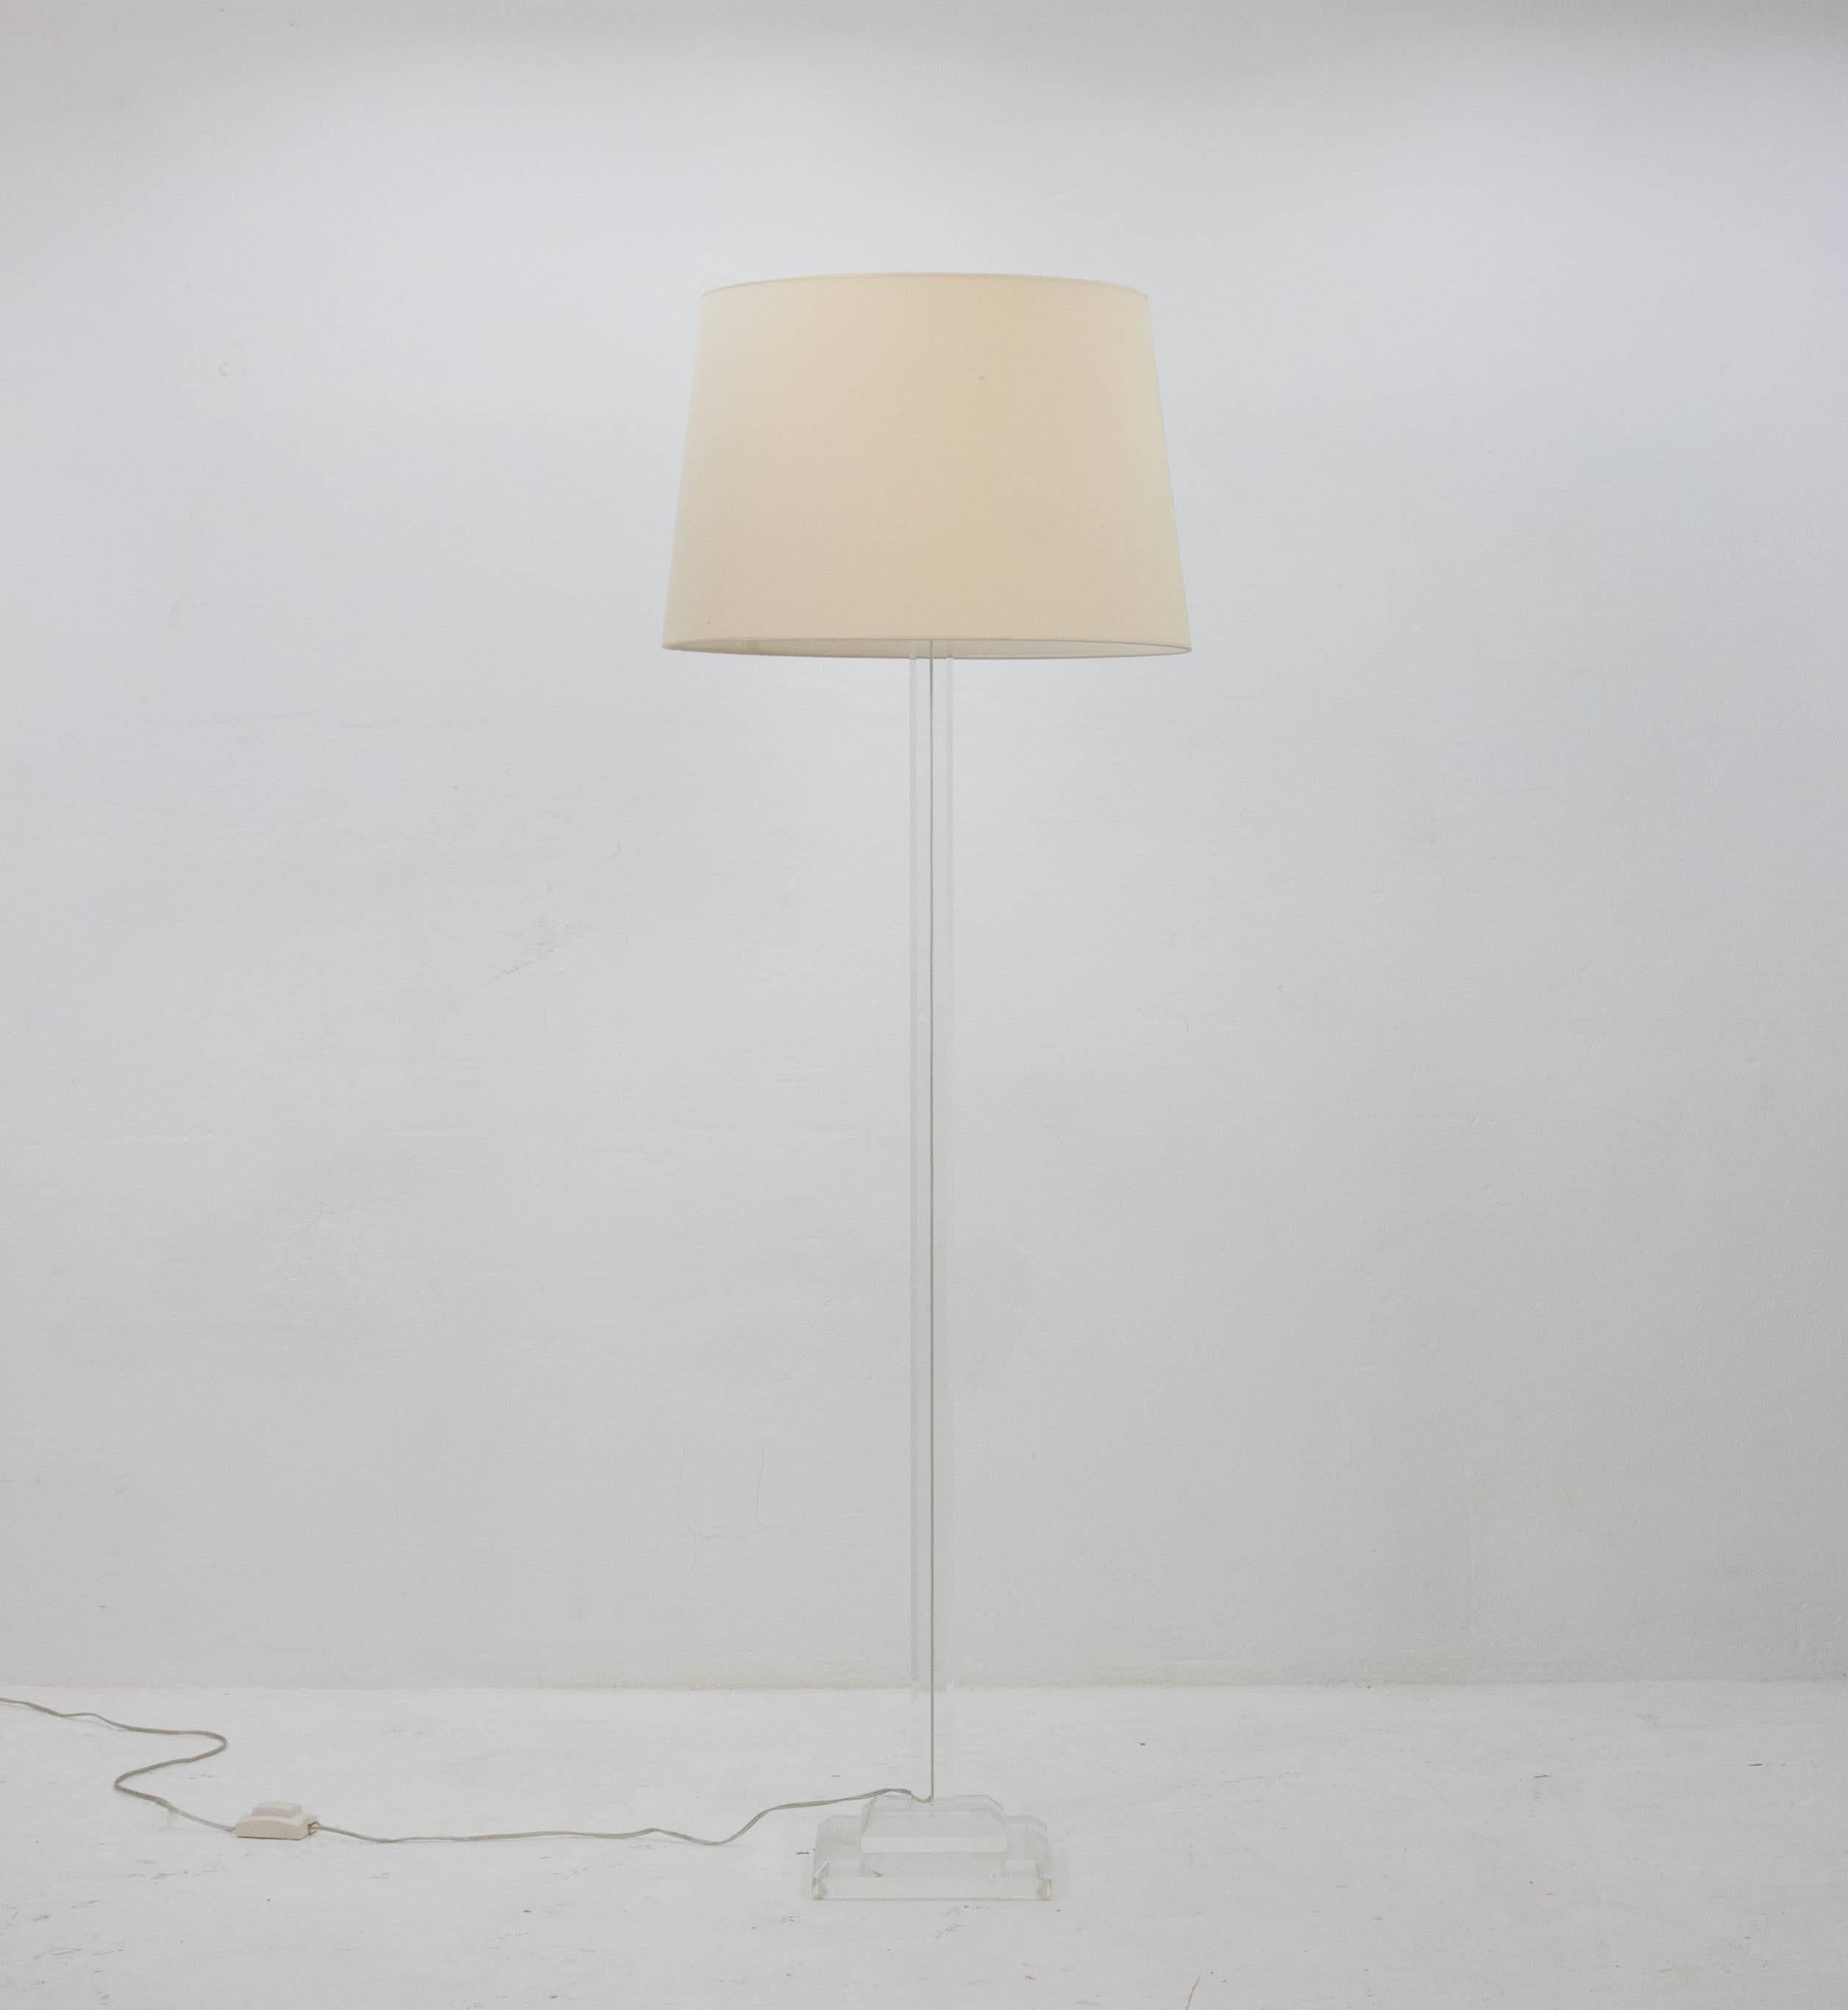 Quality Lucite floor lamp from the 1970s. The power cord falls into a channel machined out of the Lucite for a clean Silhouette.